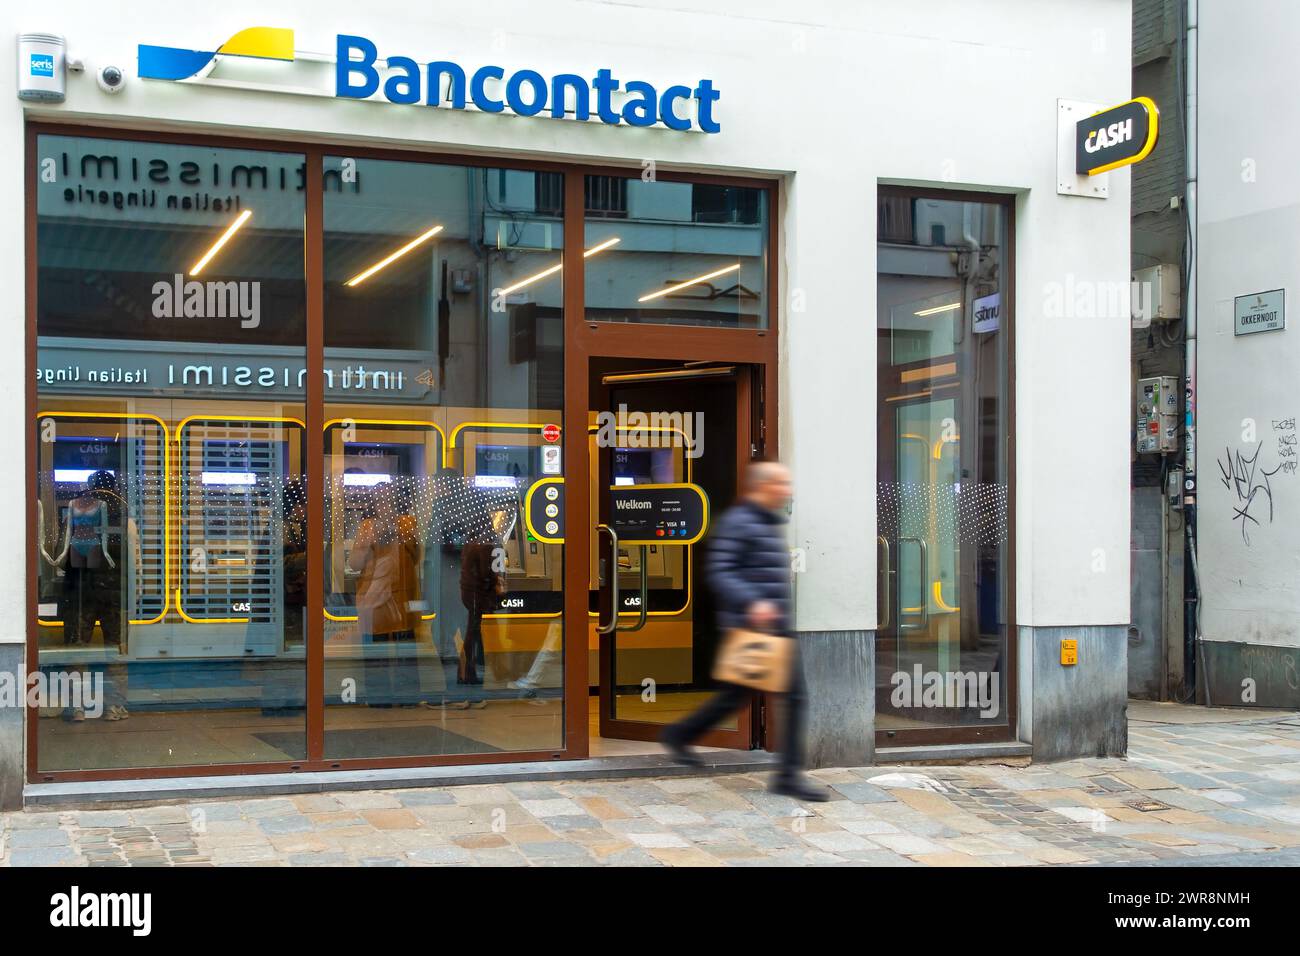 Indoor ATM cash dispenser of bank neutral Bancontact CASH point in shopping street in the city centre of Ghent / Gent, East Flanders, Belgium Stock Photo